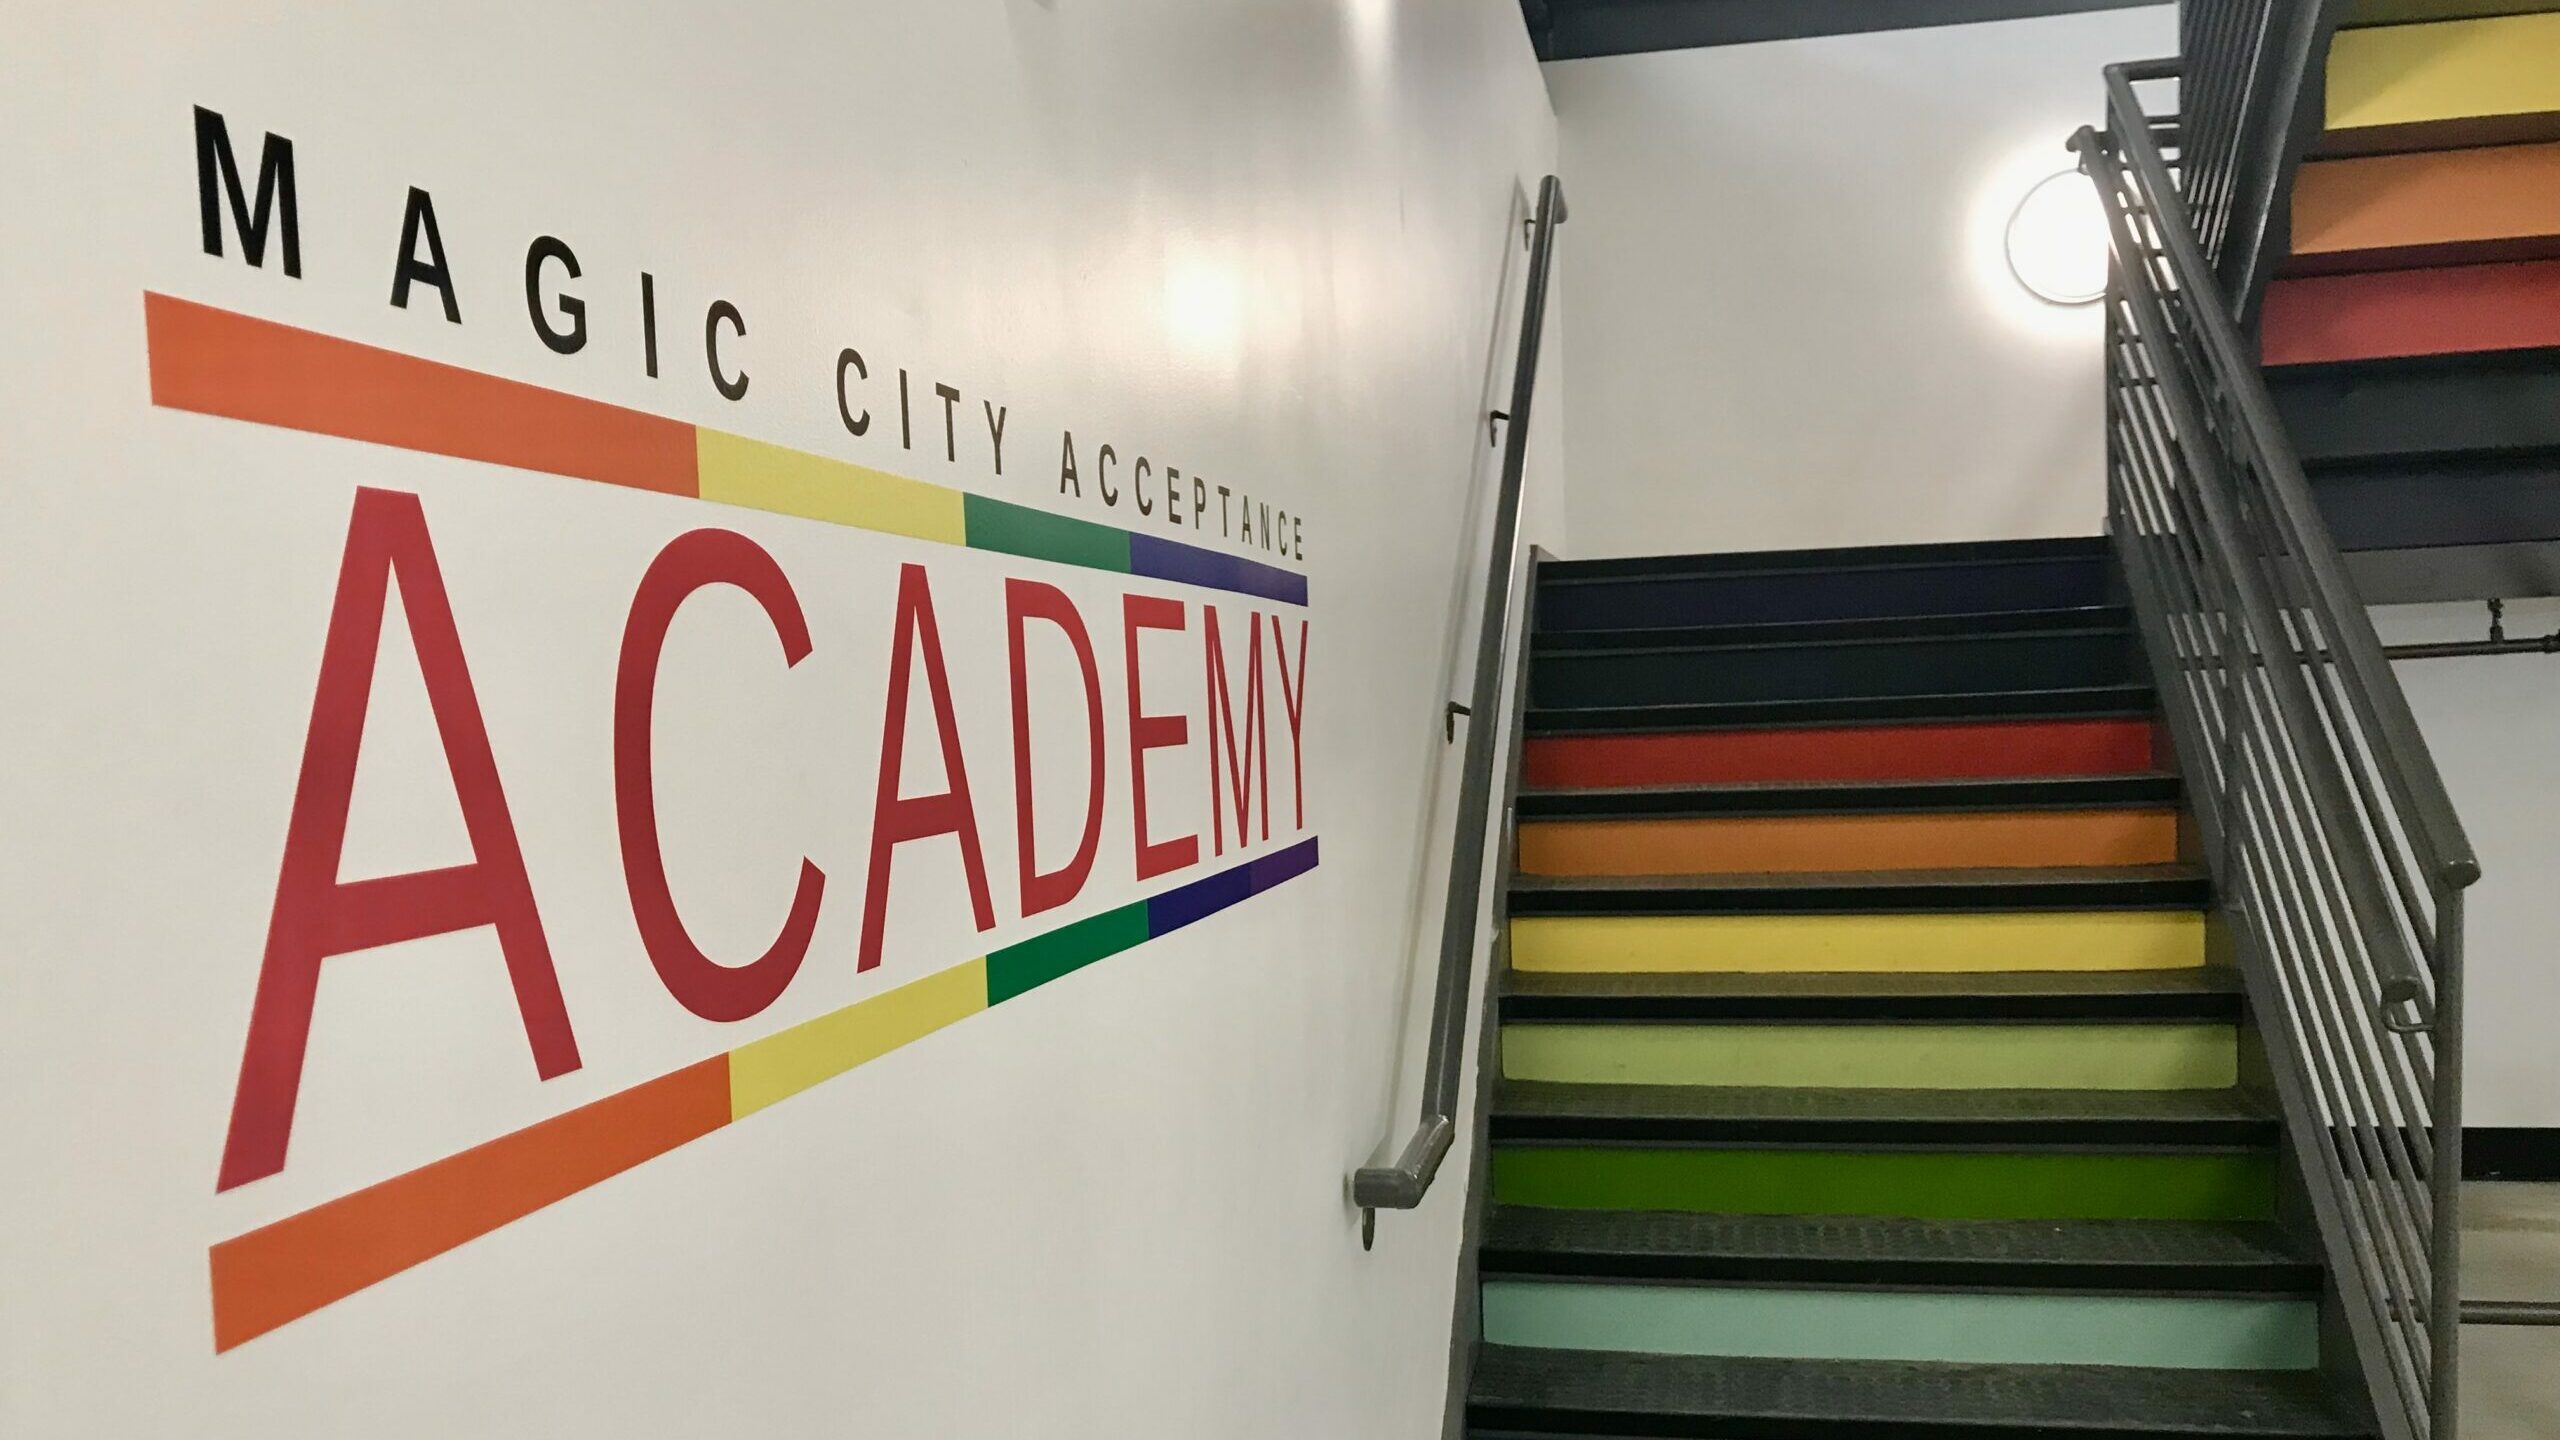 LGBTQ Students Find Hope In New Affirming School The Magic City